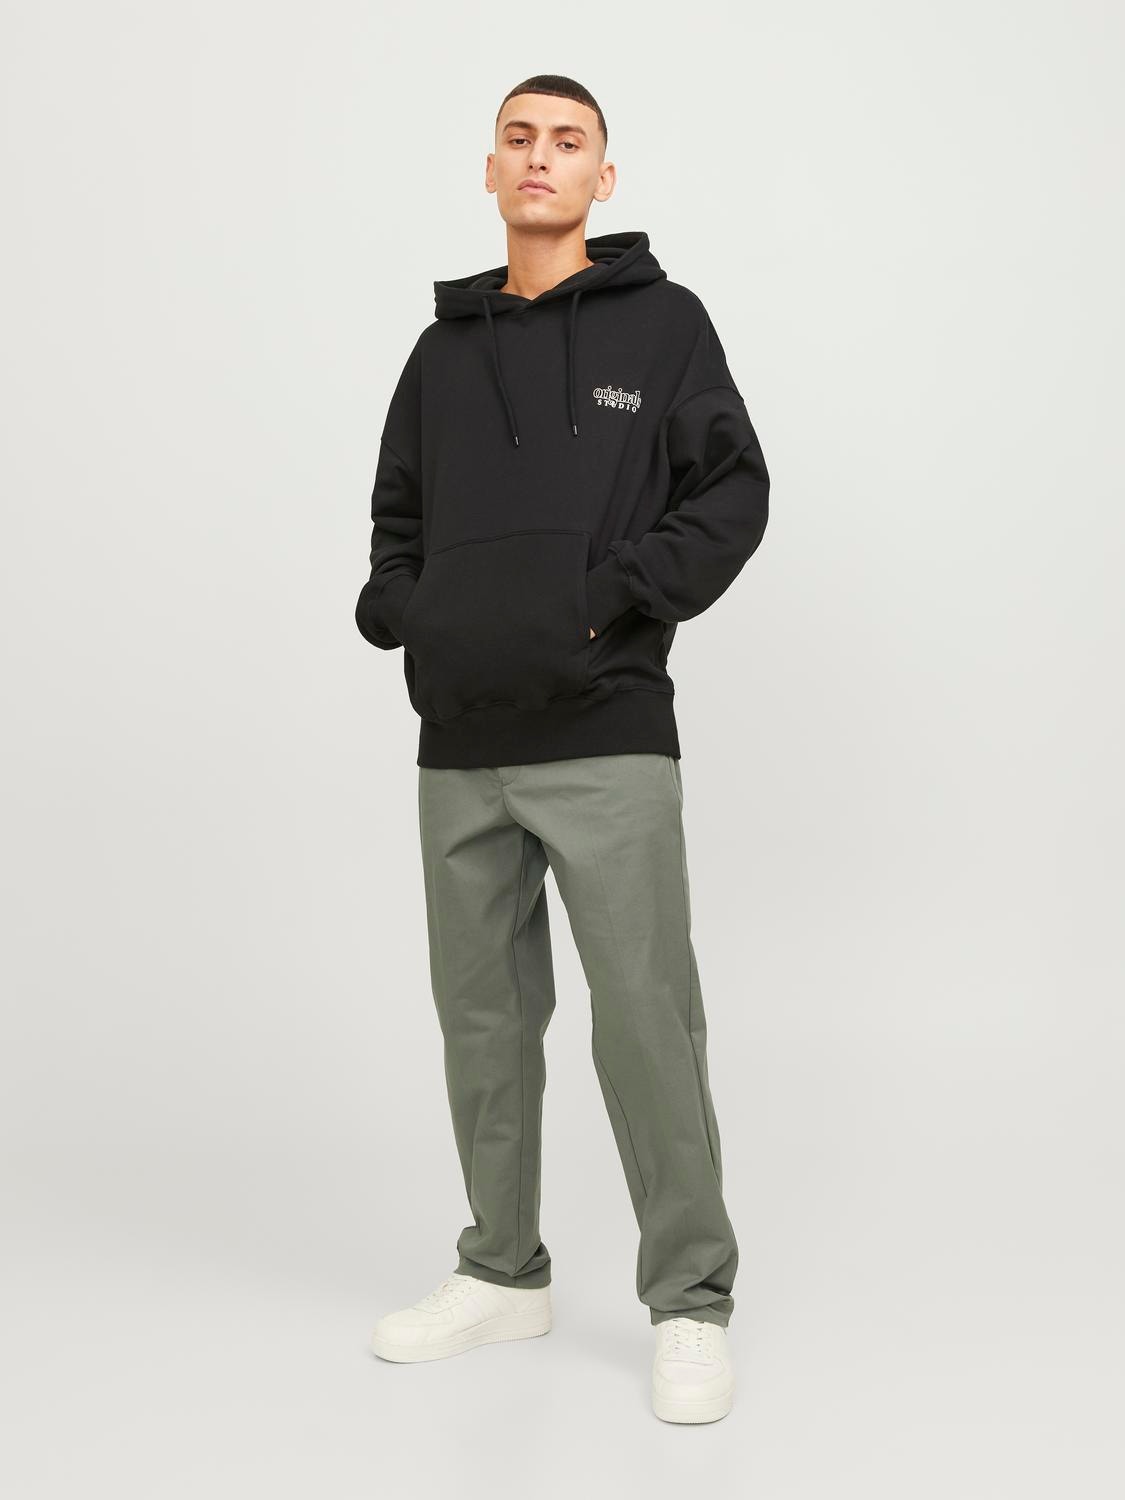 Jack & Jones Relaxed Fit Chinobukse -Agave Green - 12253083